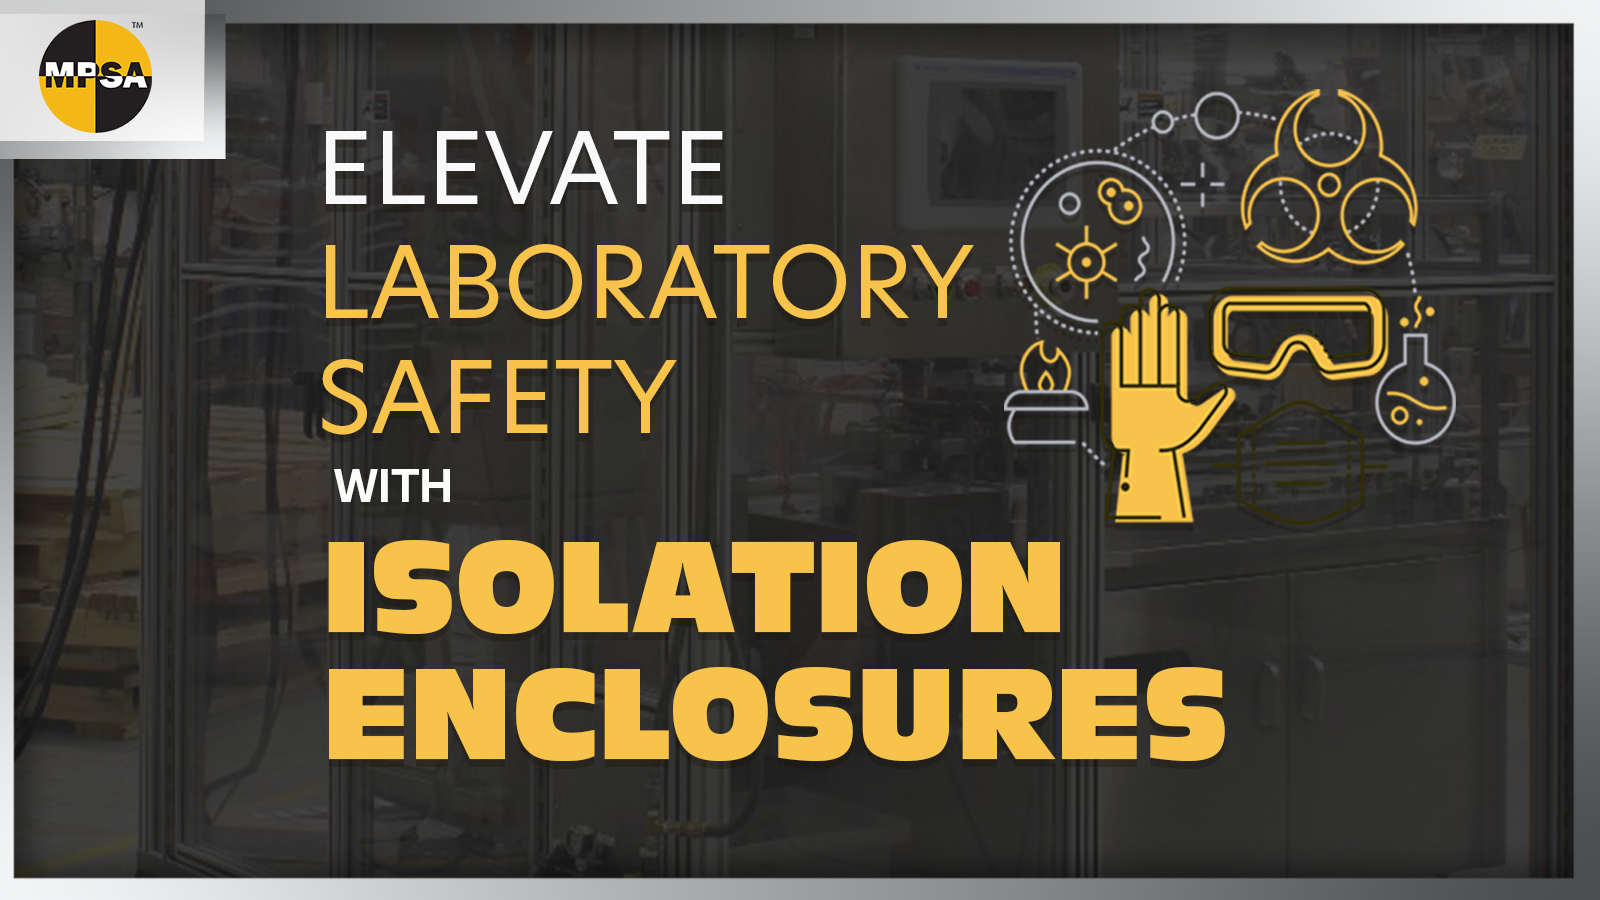 How to Improve Laboratory Safety with Isolation Enclosures